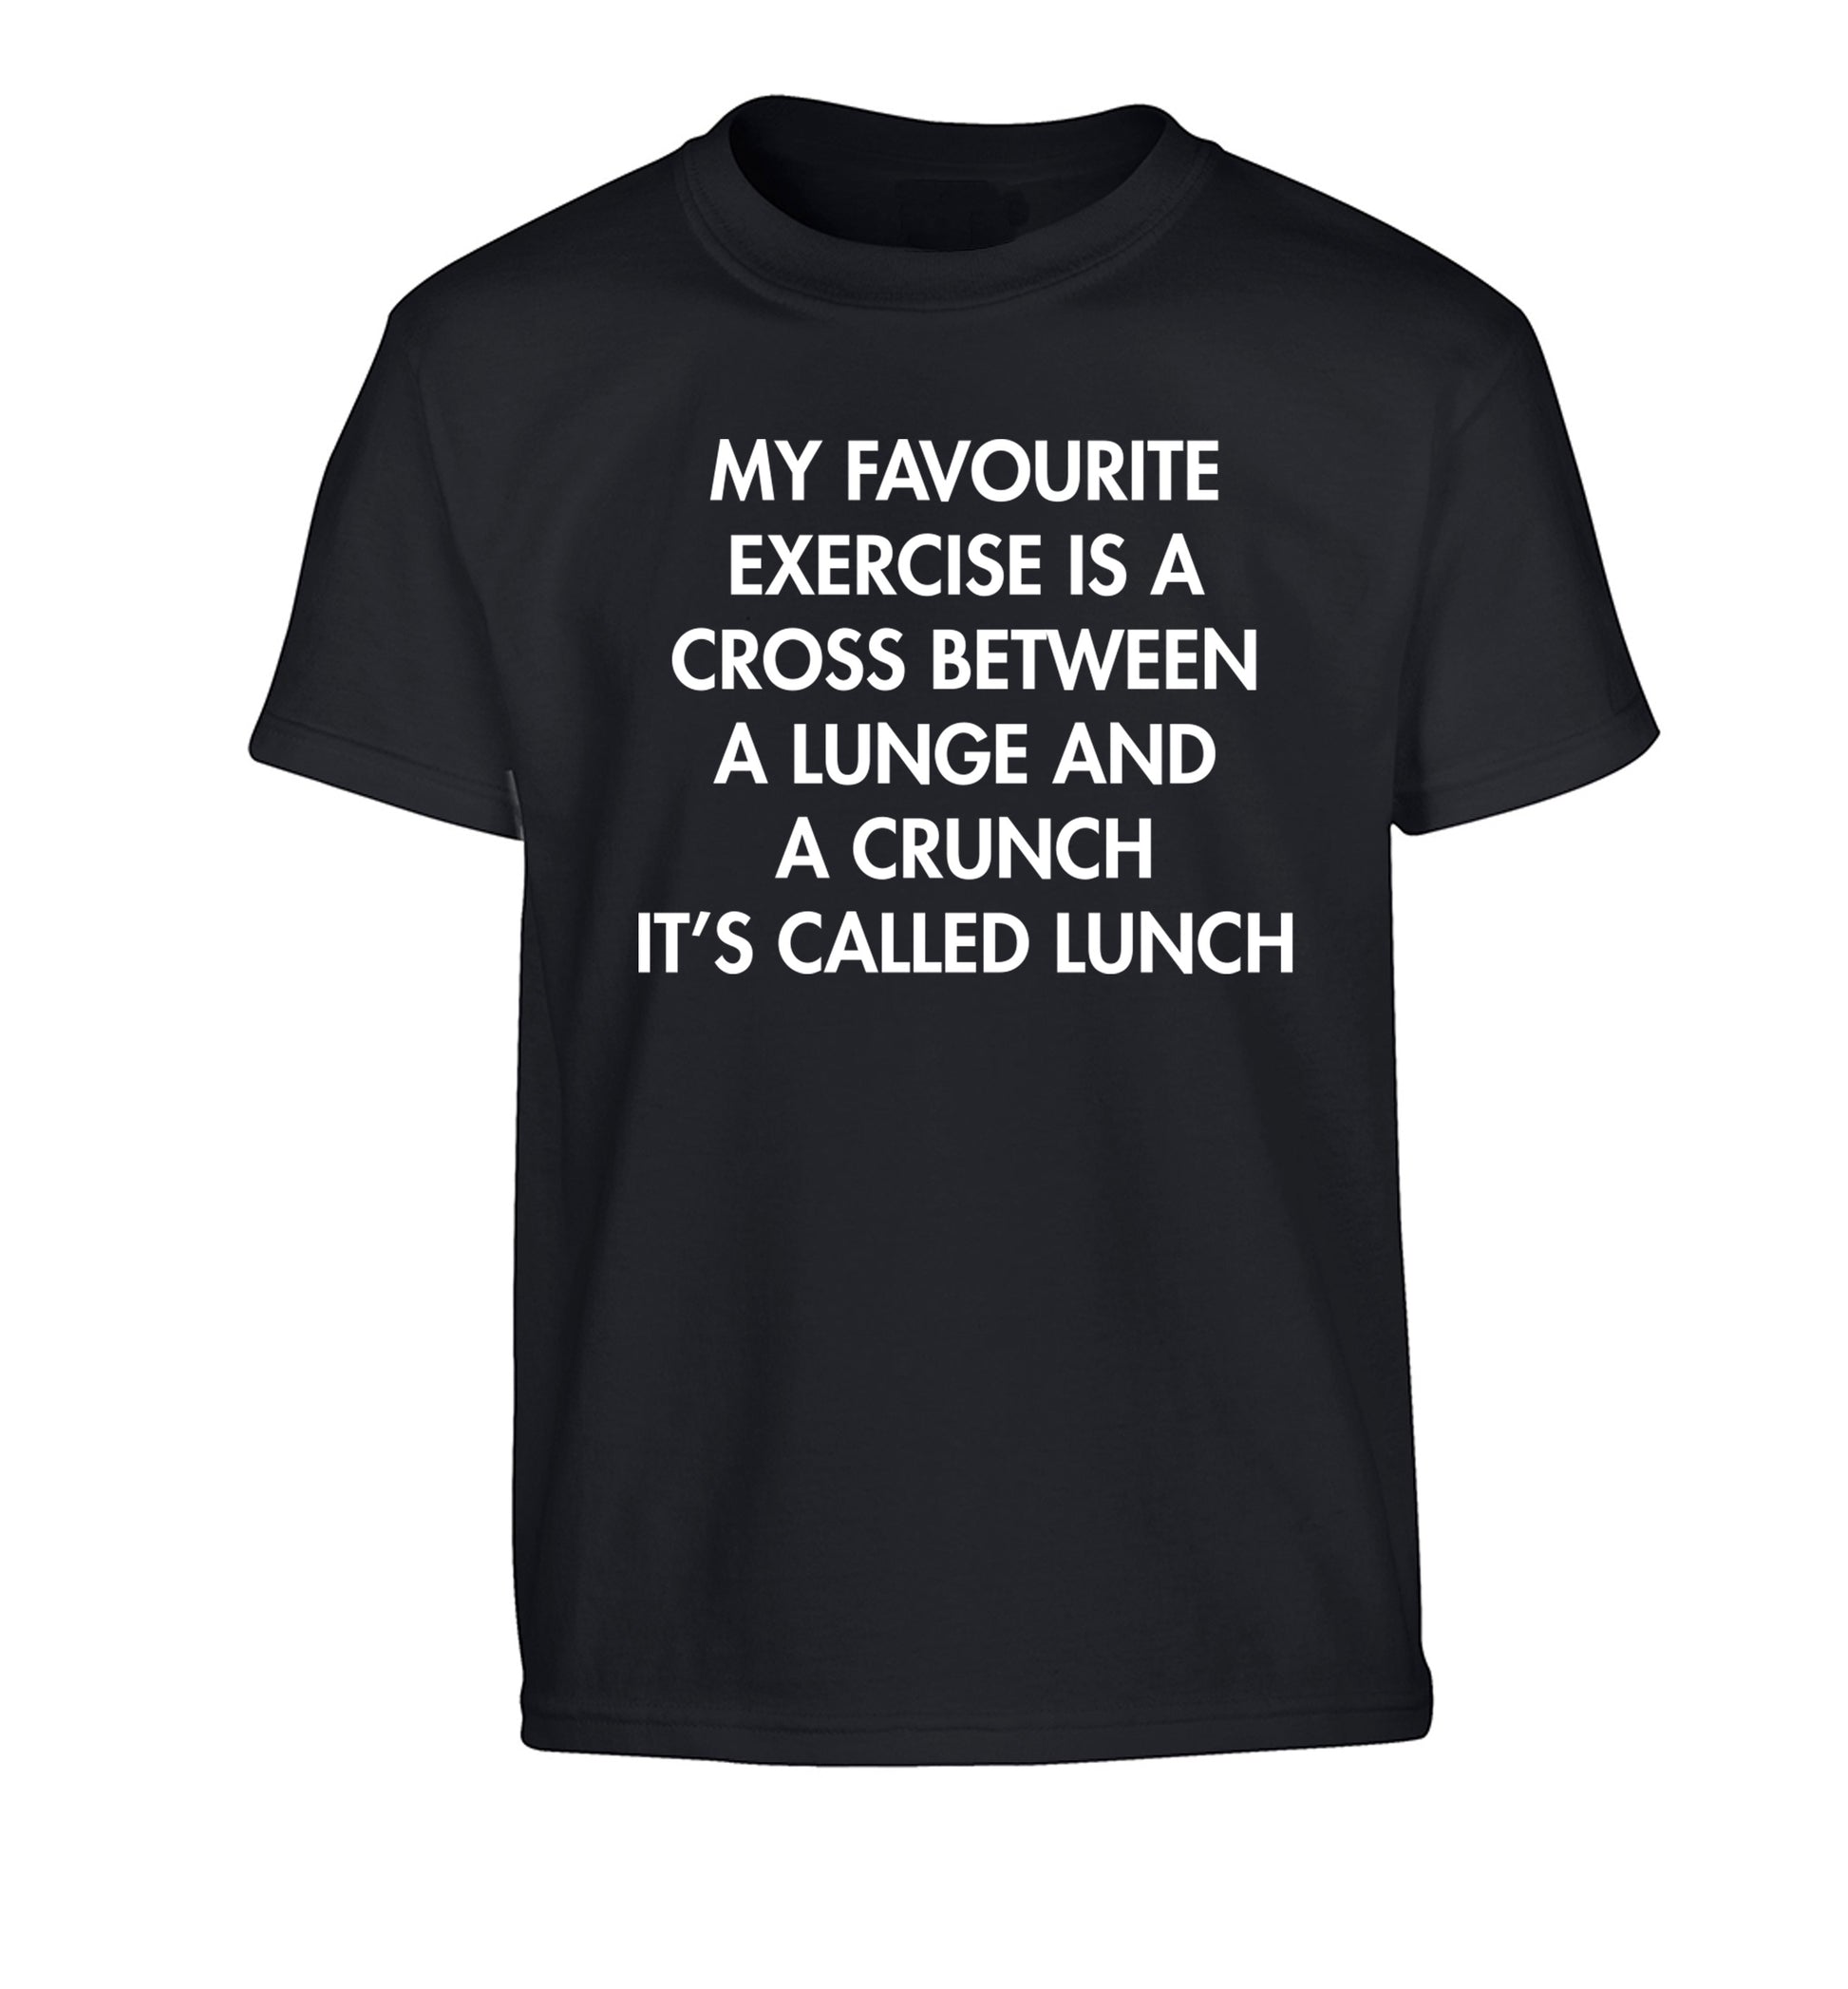 My favourite exercise is a cross between a lung and a crunch it's called lunch Children's black Tshirt 12-14 Years